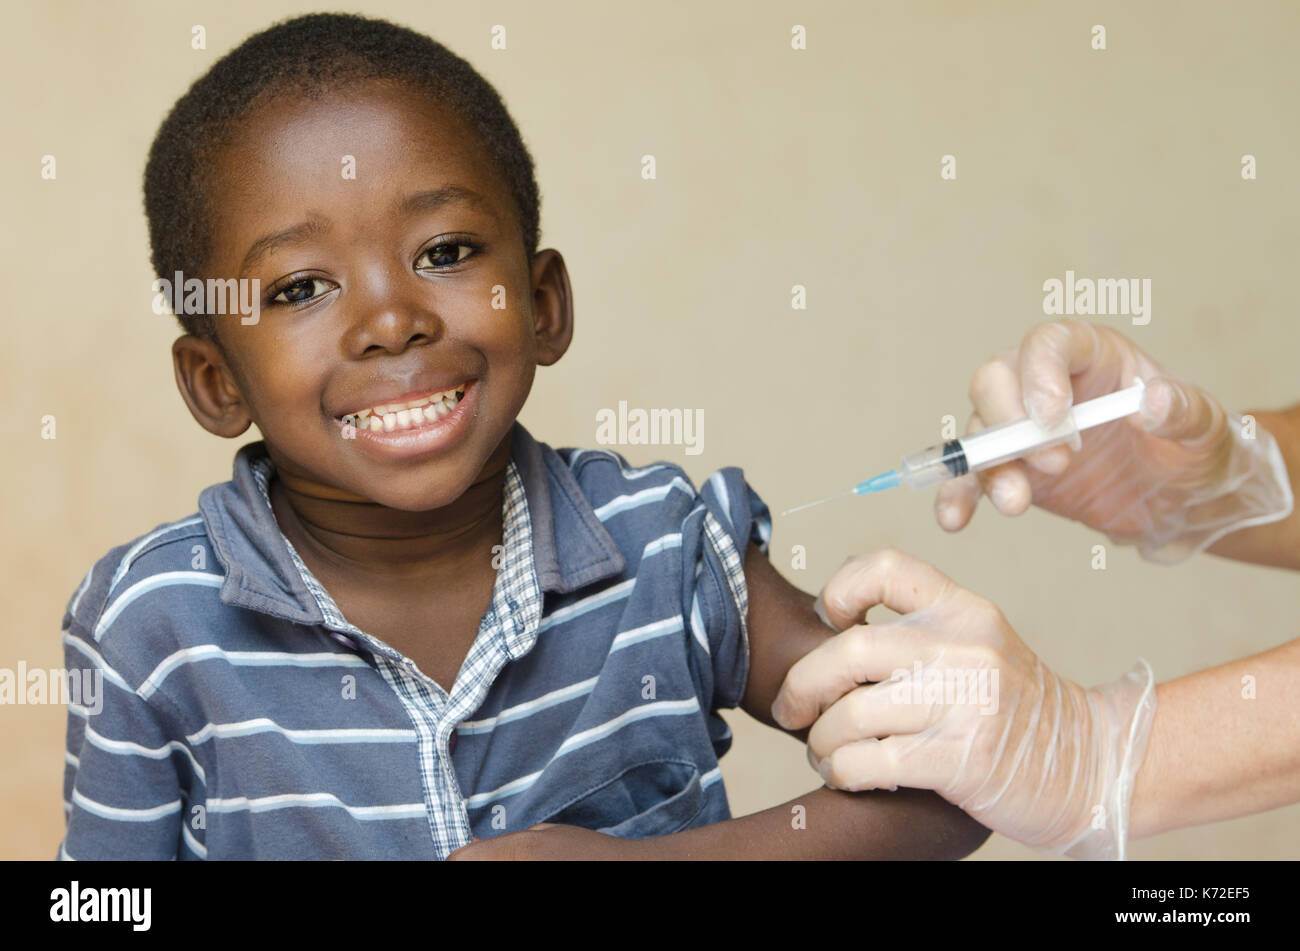 African boy happy about getting a vaccination Stock Photo